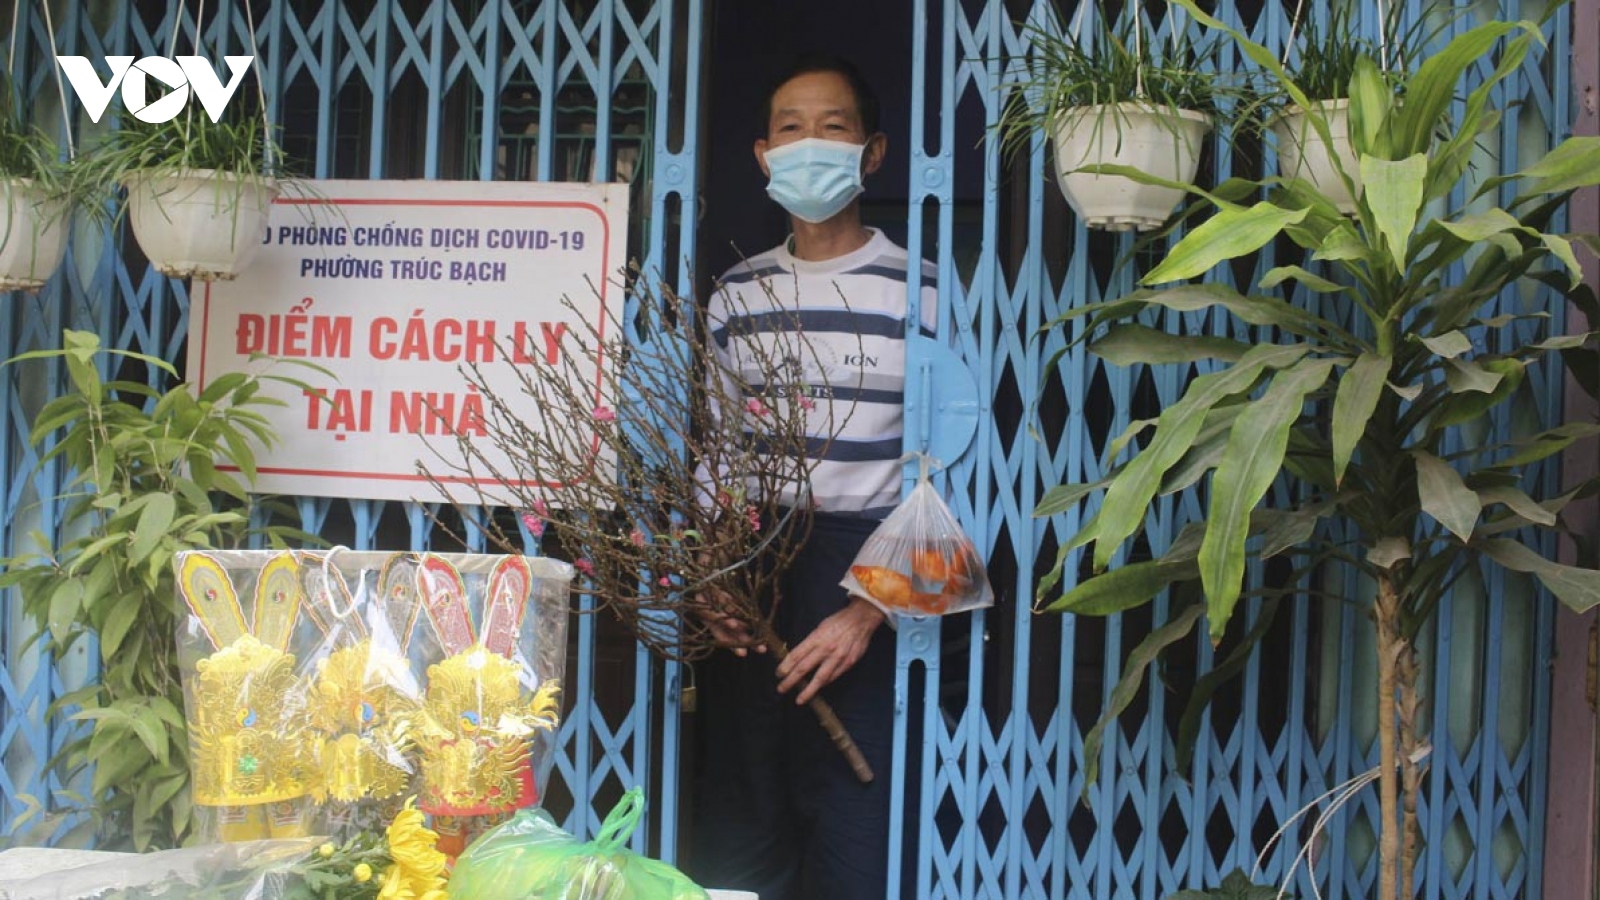 COVID-19 cases in Hanoi receive Tet gifts 